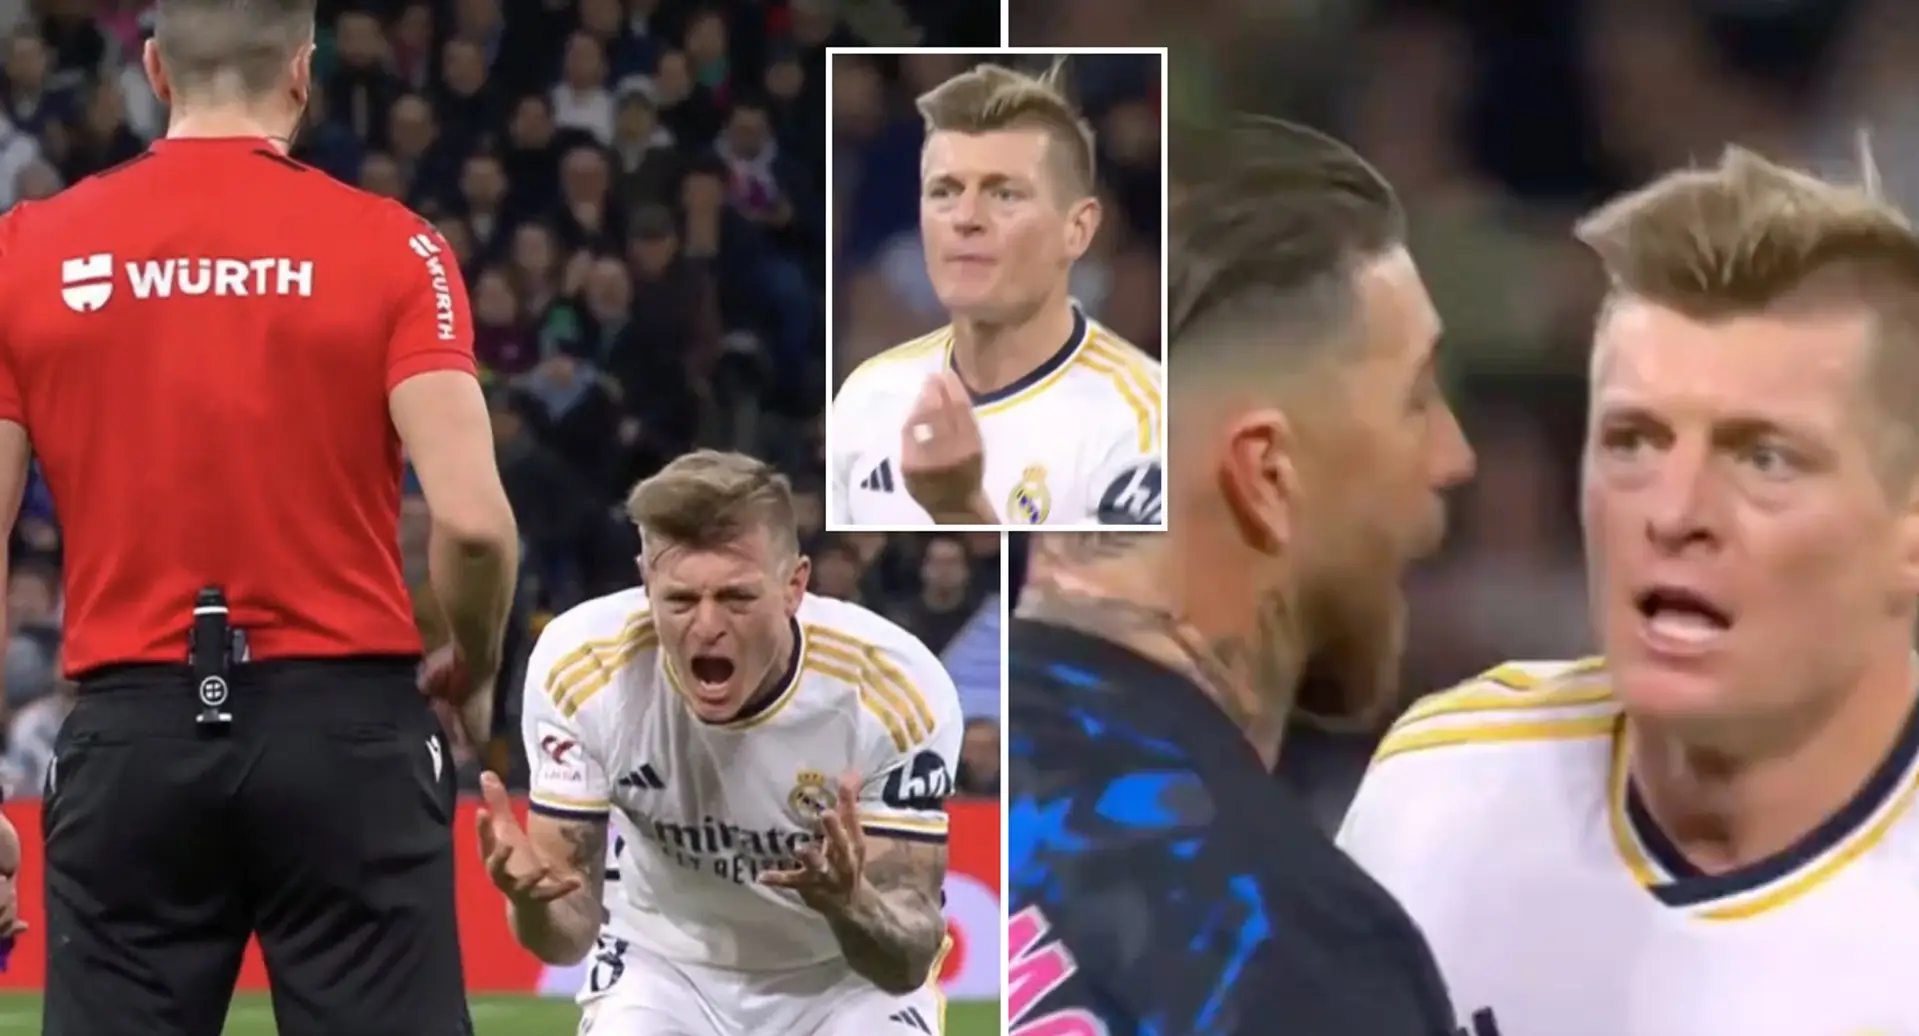 Sergio Ramos drags FURIOUS Kroos away from trouble after referee shows Toni yellow card